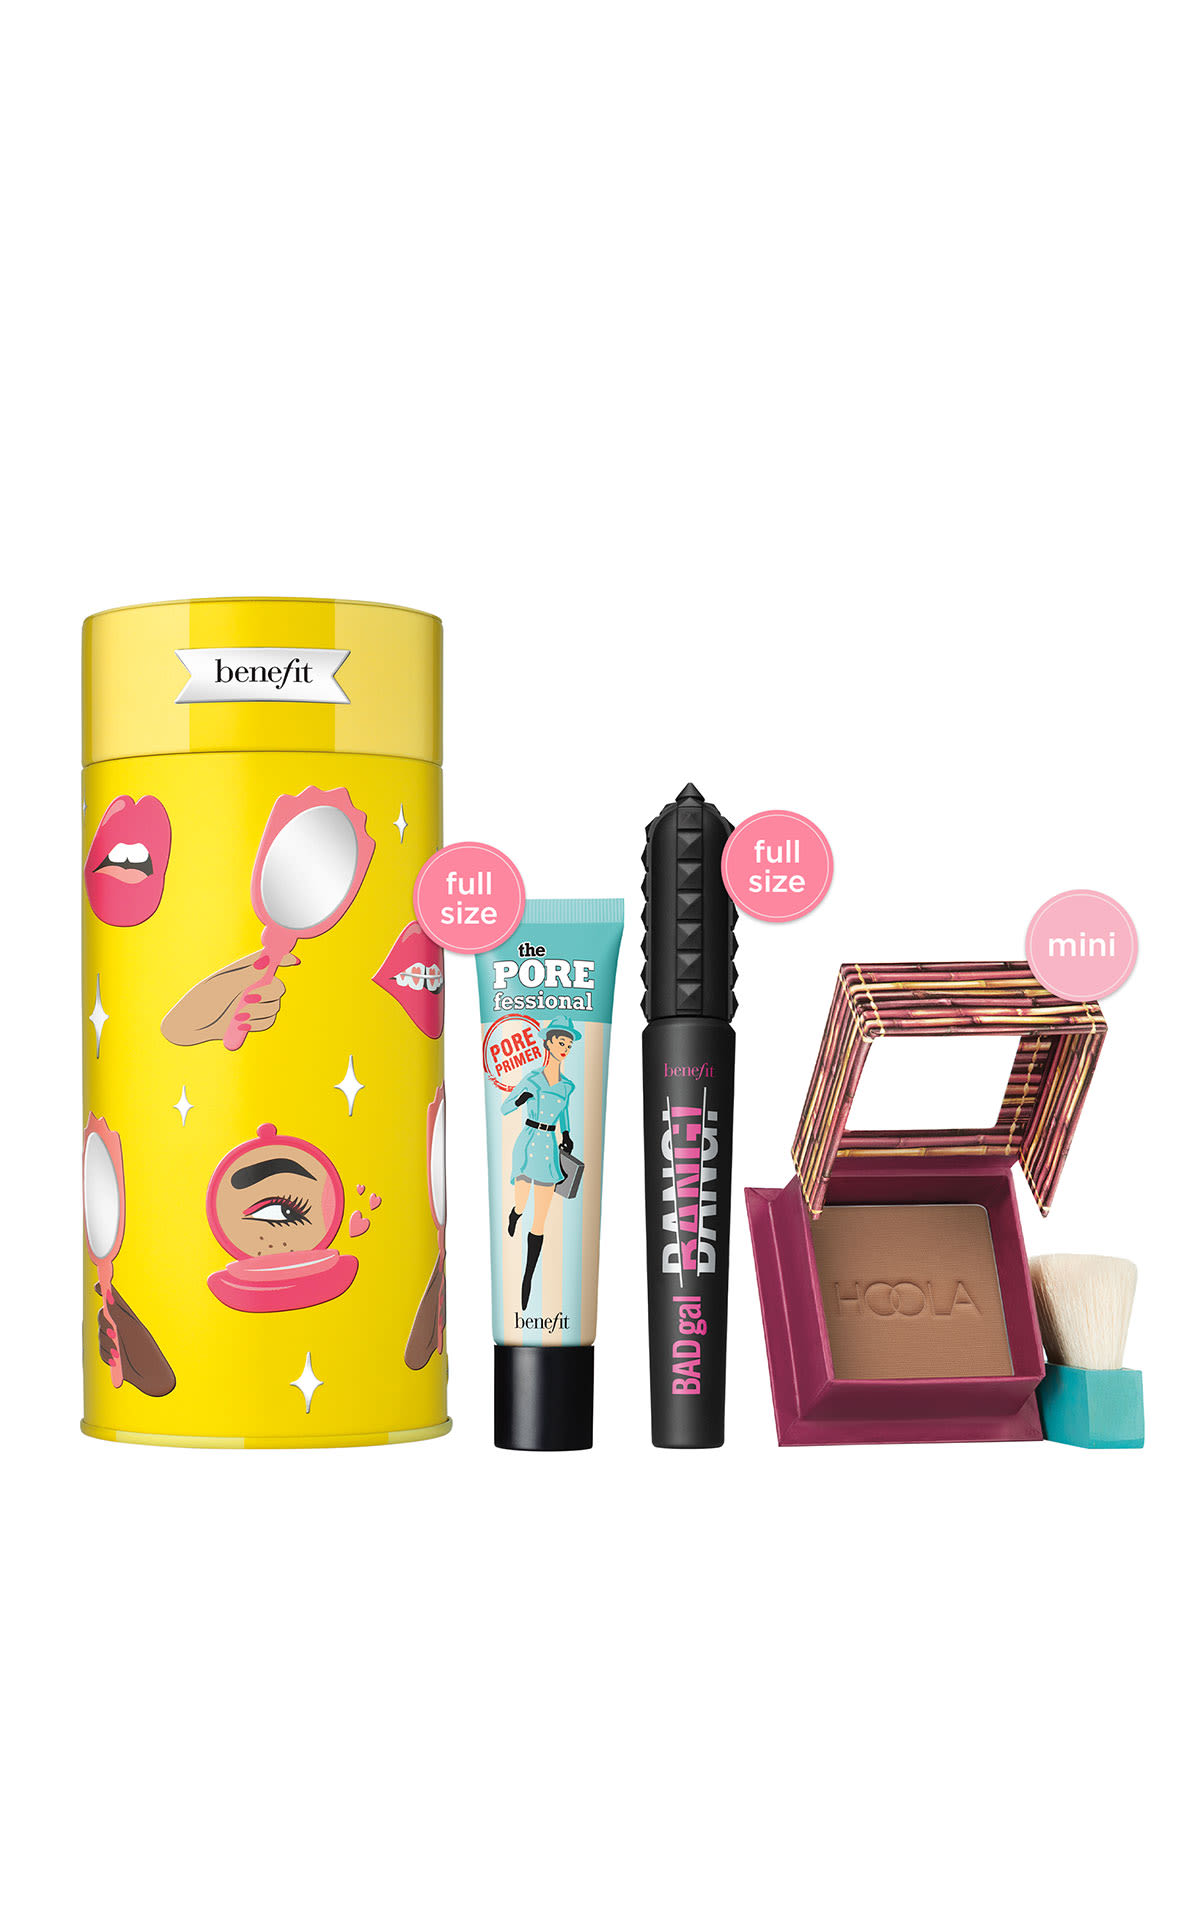 Benefit Cosmetics Badgals Night Out Makeup set from Bicester Village